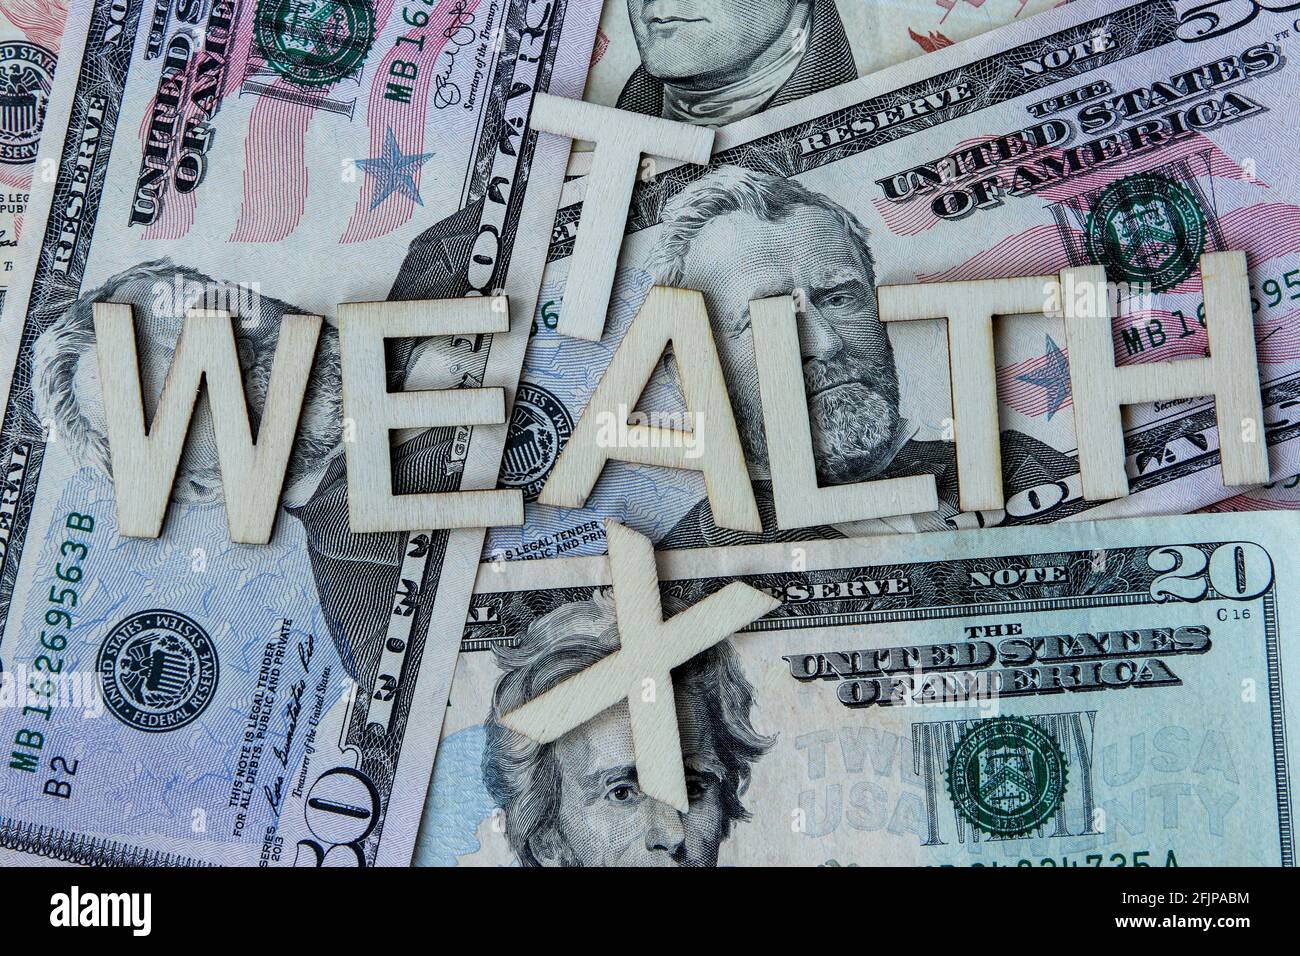 Wealthy tax signage on a background of American dollars. Stock Photo